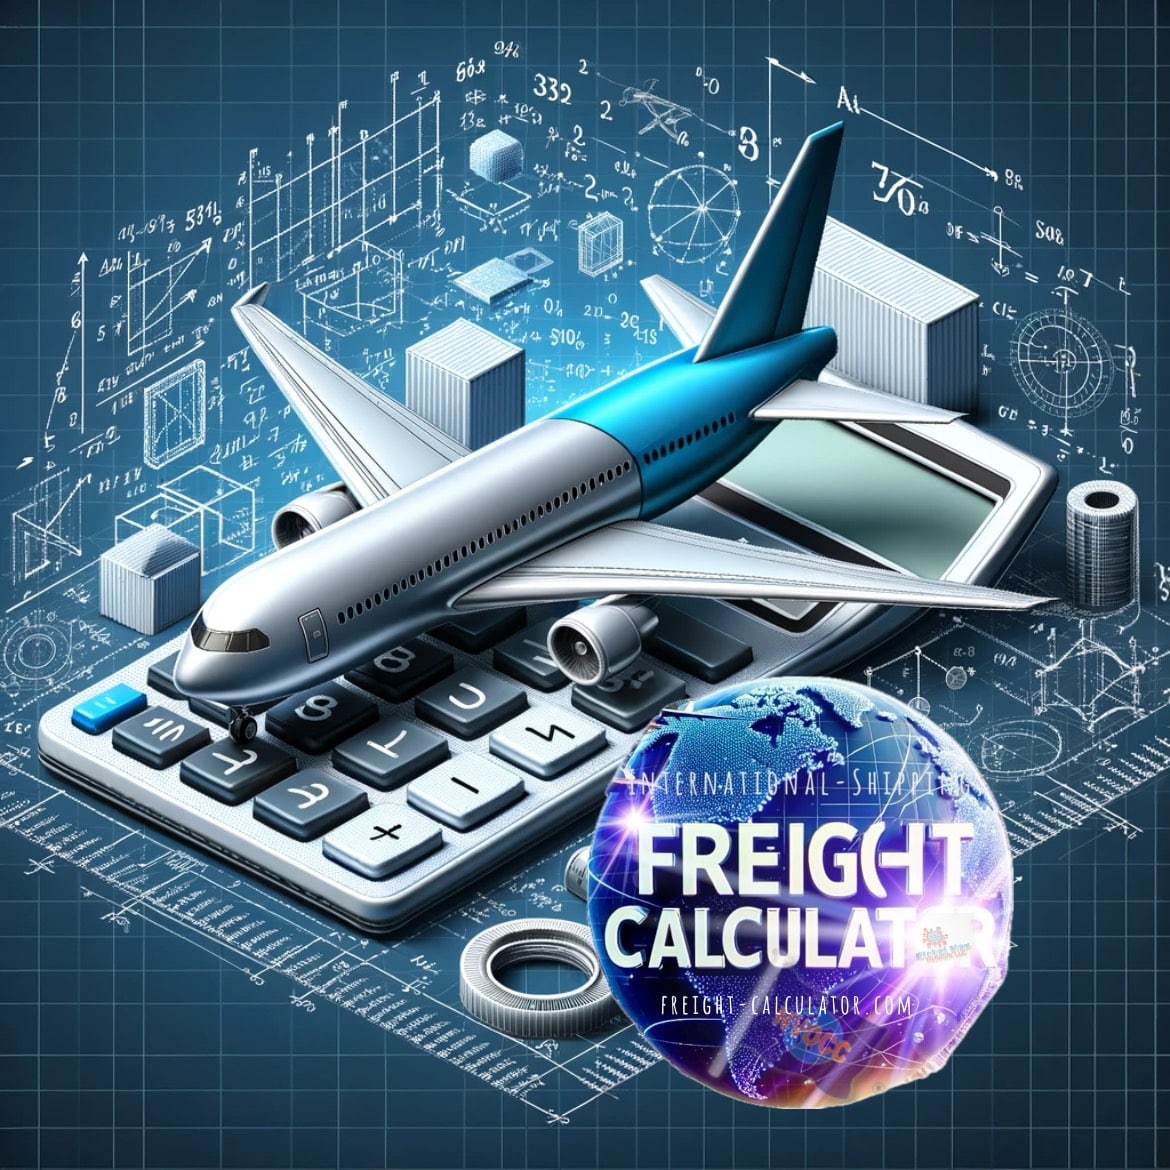 Air Forwarding Shipping Airline Exchange Cargo Rate